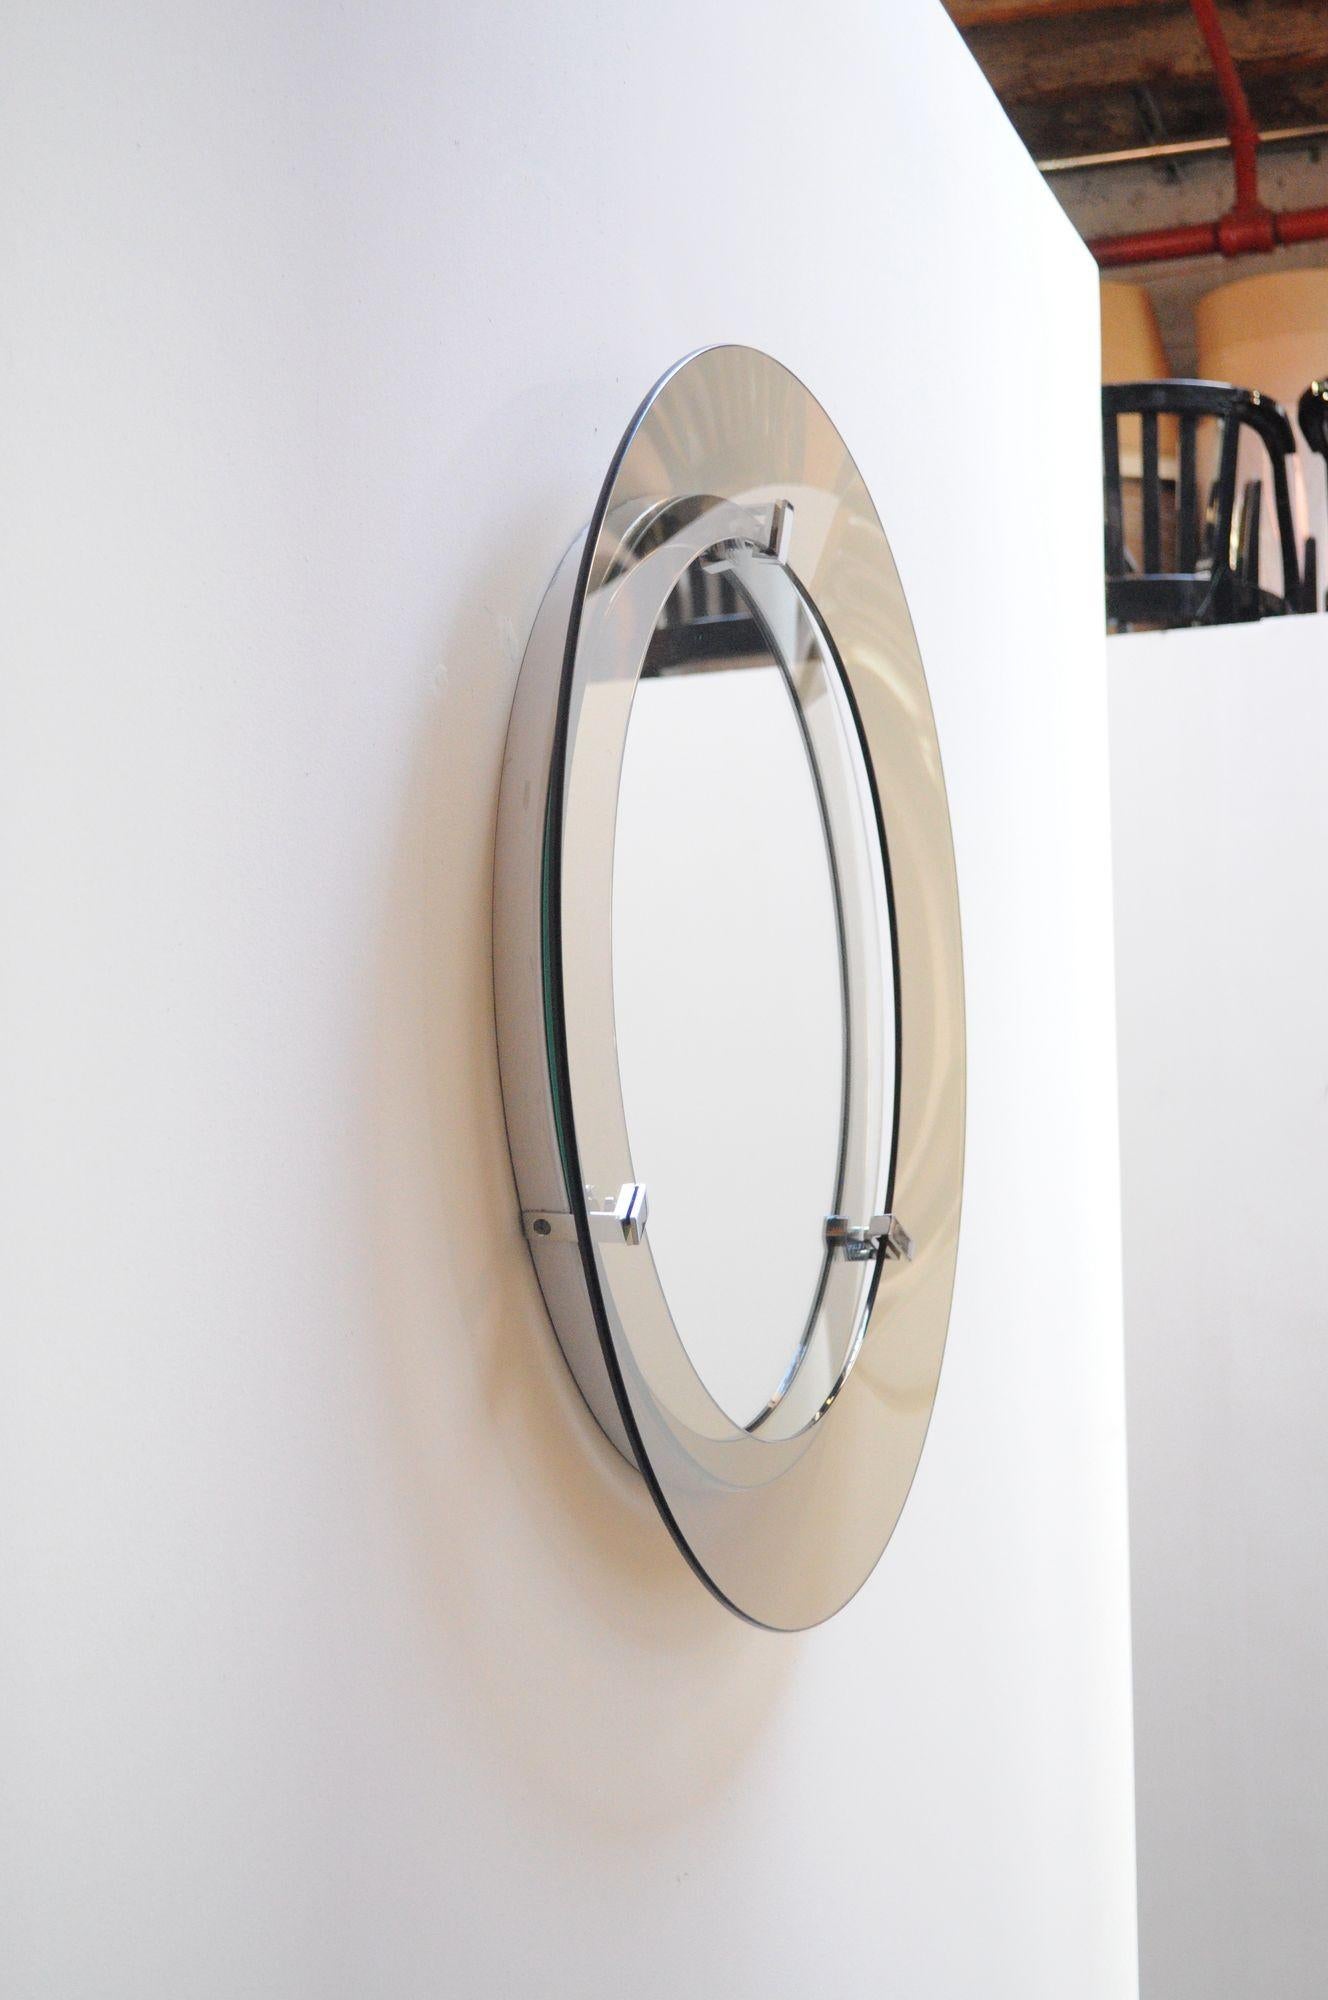 Mid-20th Century Italian Modernist Smoked Glass Circular Wall Mirror by Veca For Sale